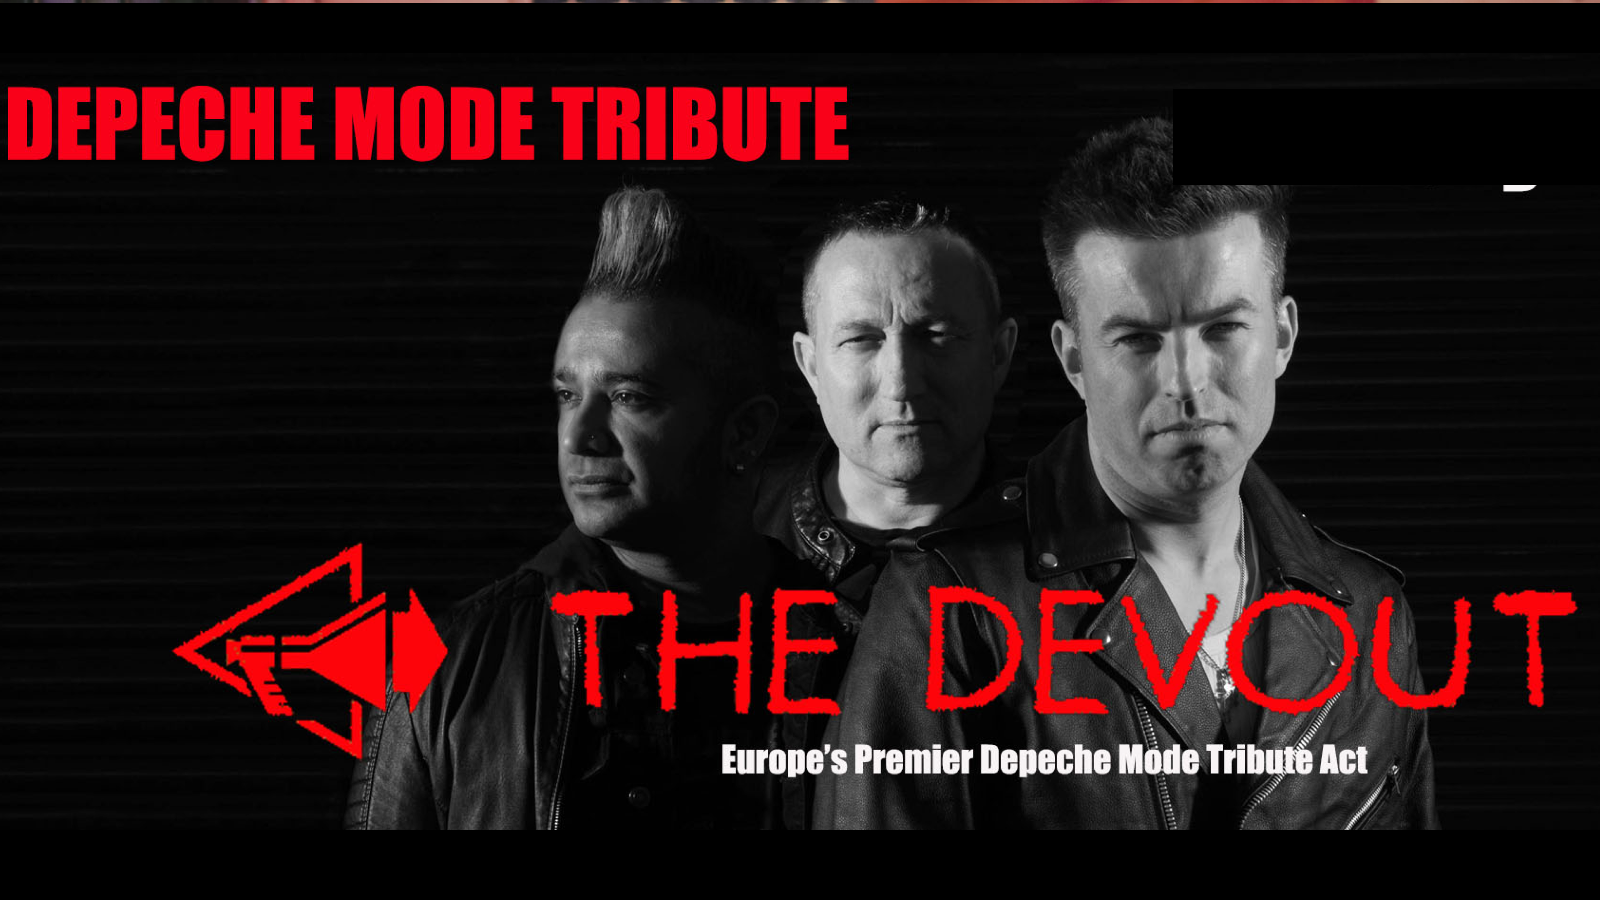 DEPECHE MODE’S GREATEST HITS starring No.1 tribute The Devout